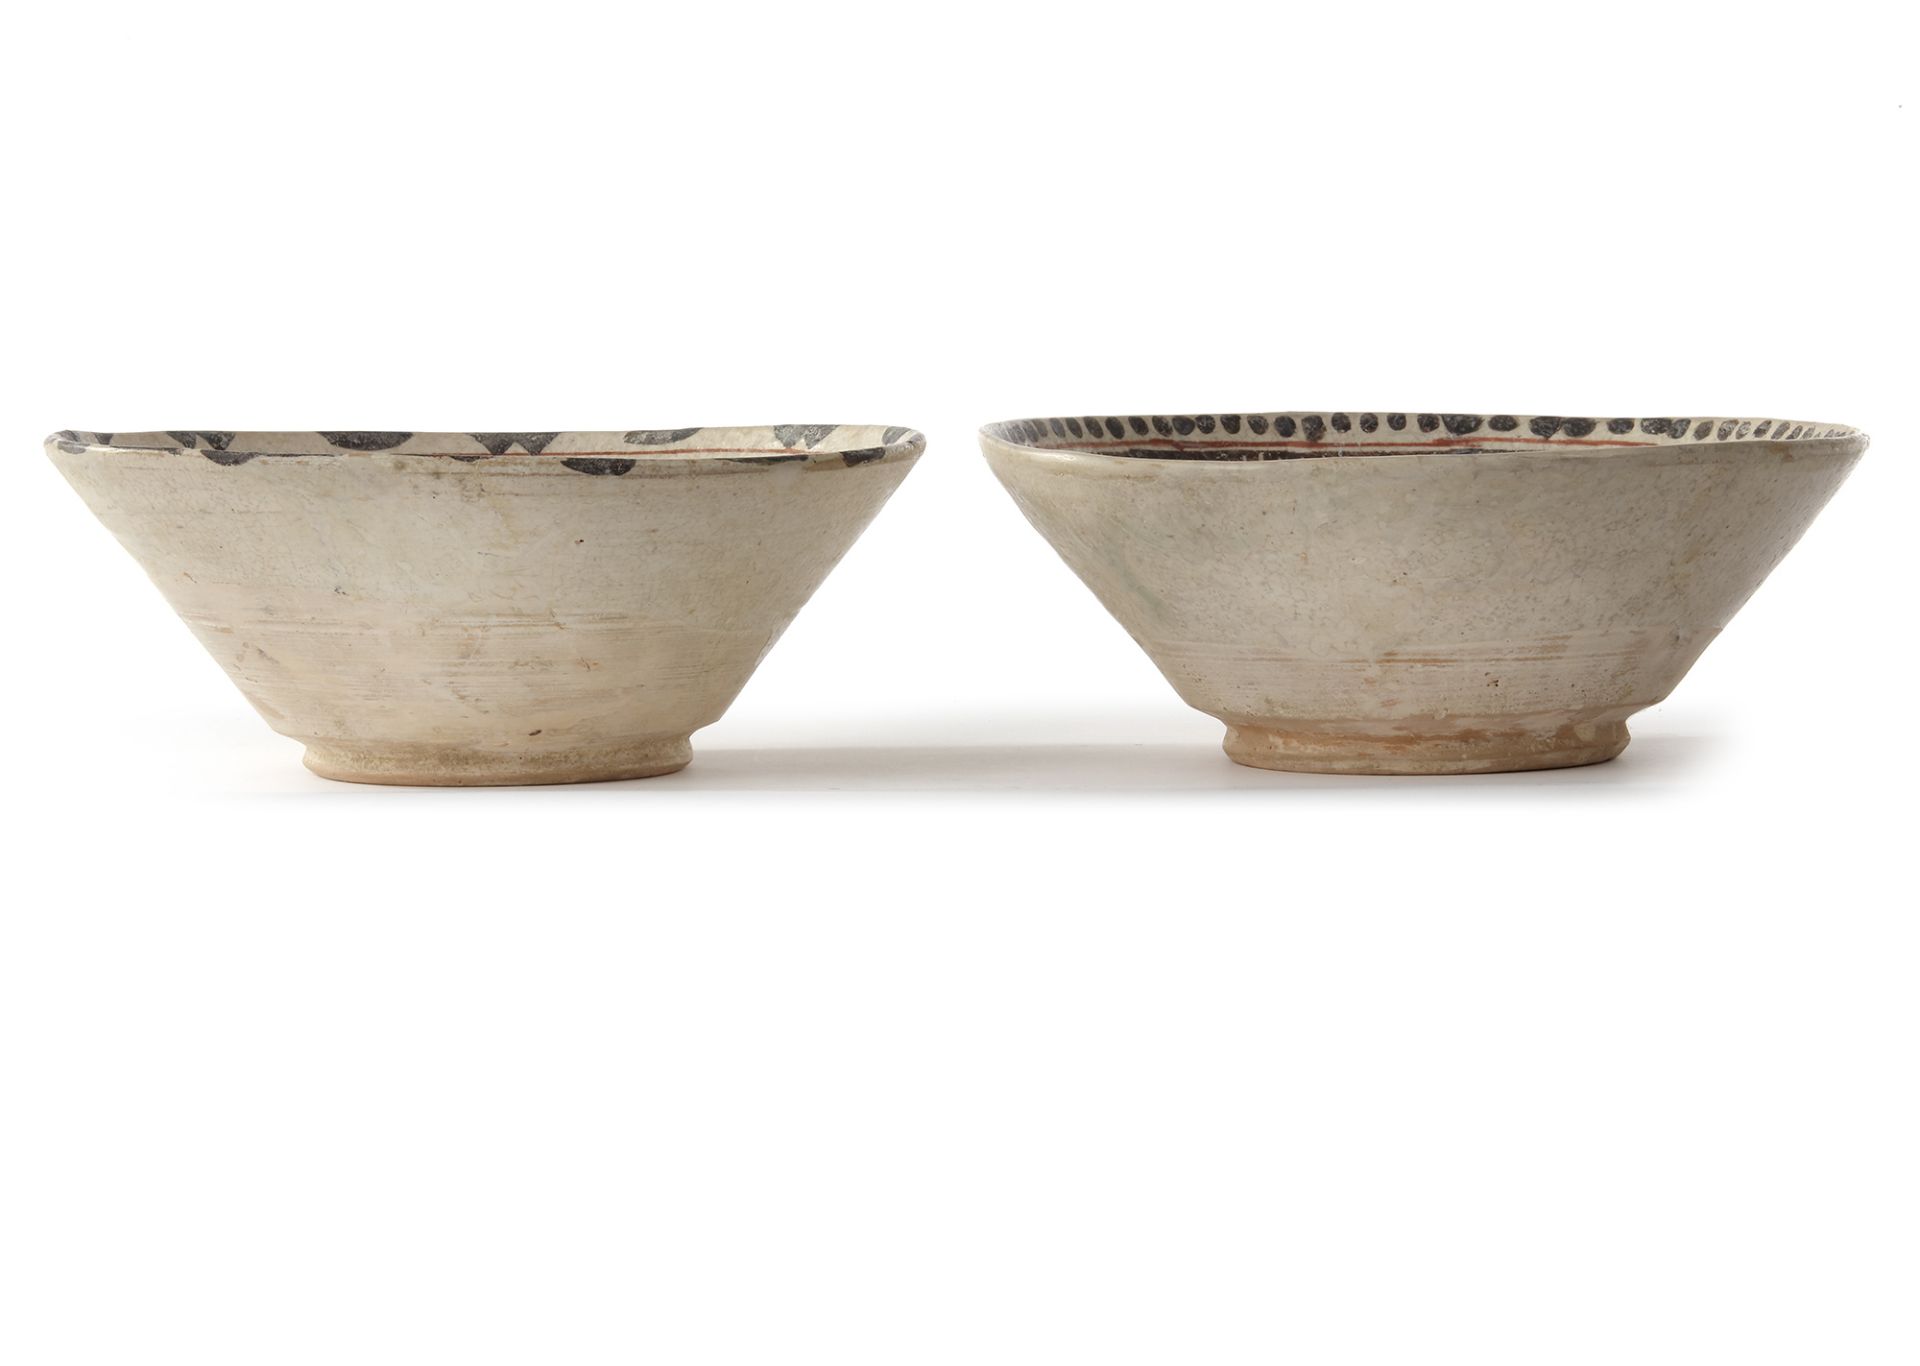 TWO NISHAPUR SLIP-PAINTED POTTERY BOWLS, 9TH-10TH CENTURY - Image 4 of 4